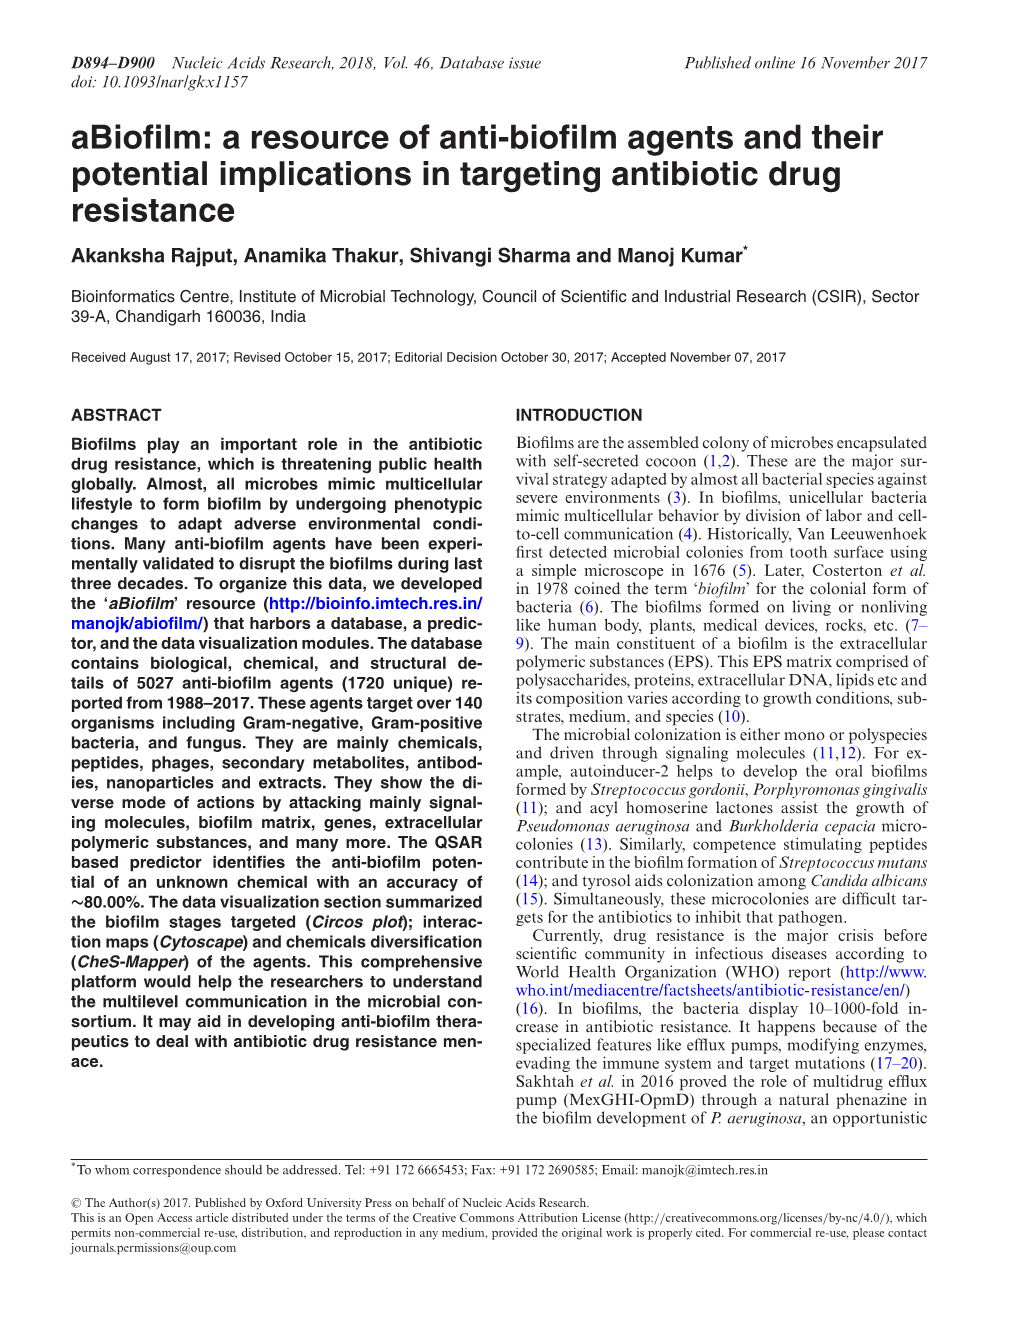 A Resource of Anti-Biofilm Agents and Their Potential